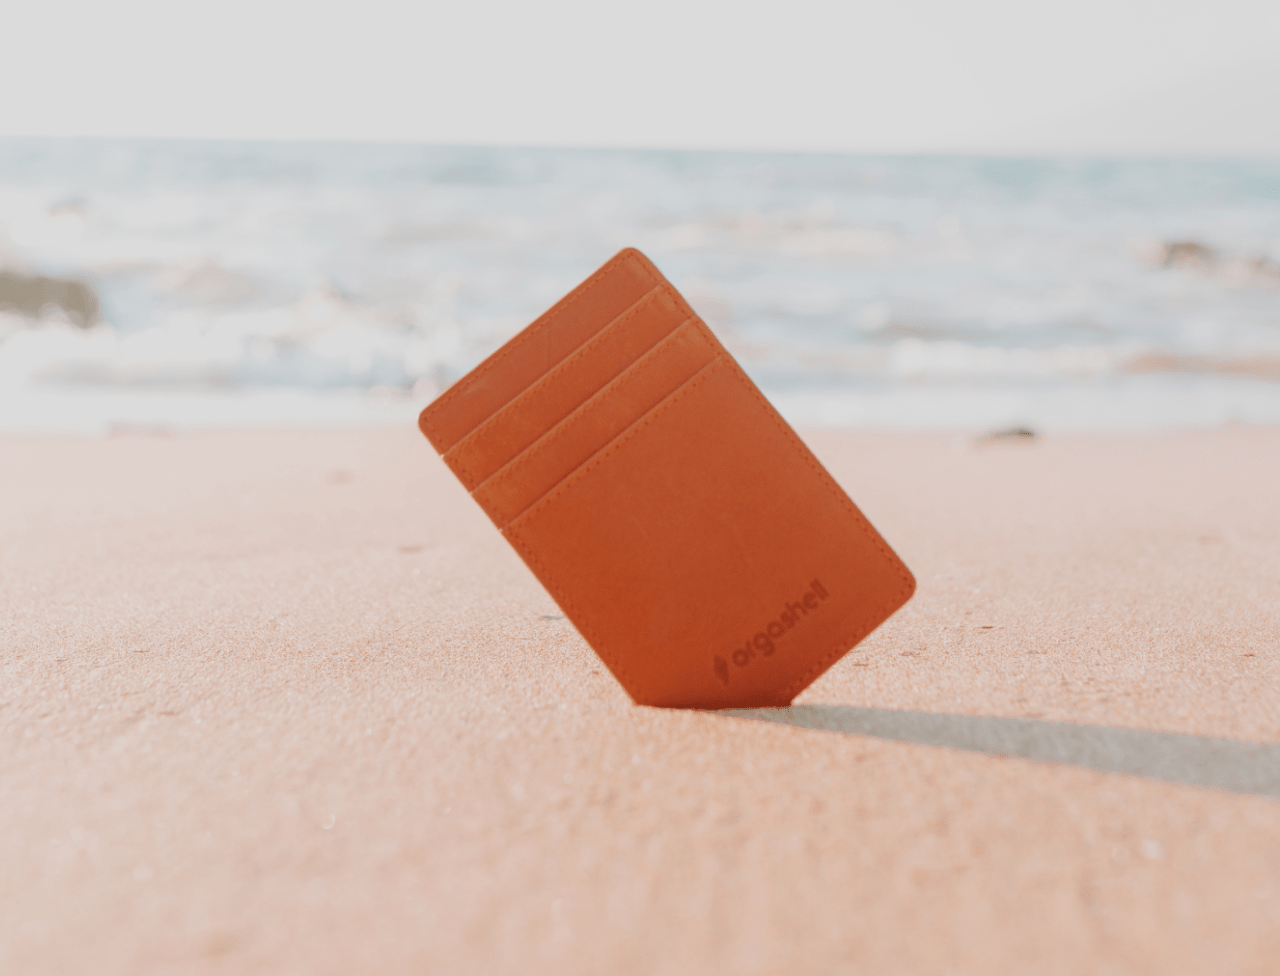 Orgashell wallet propped up in sand at a beach